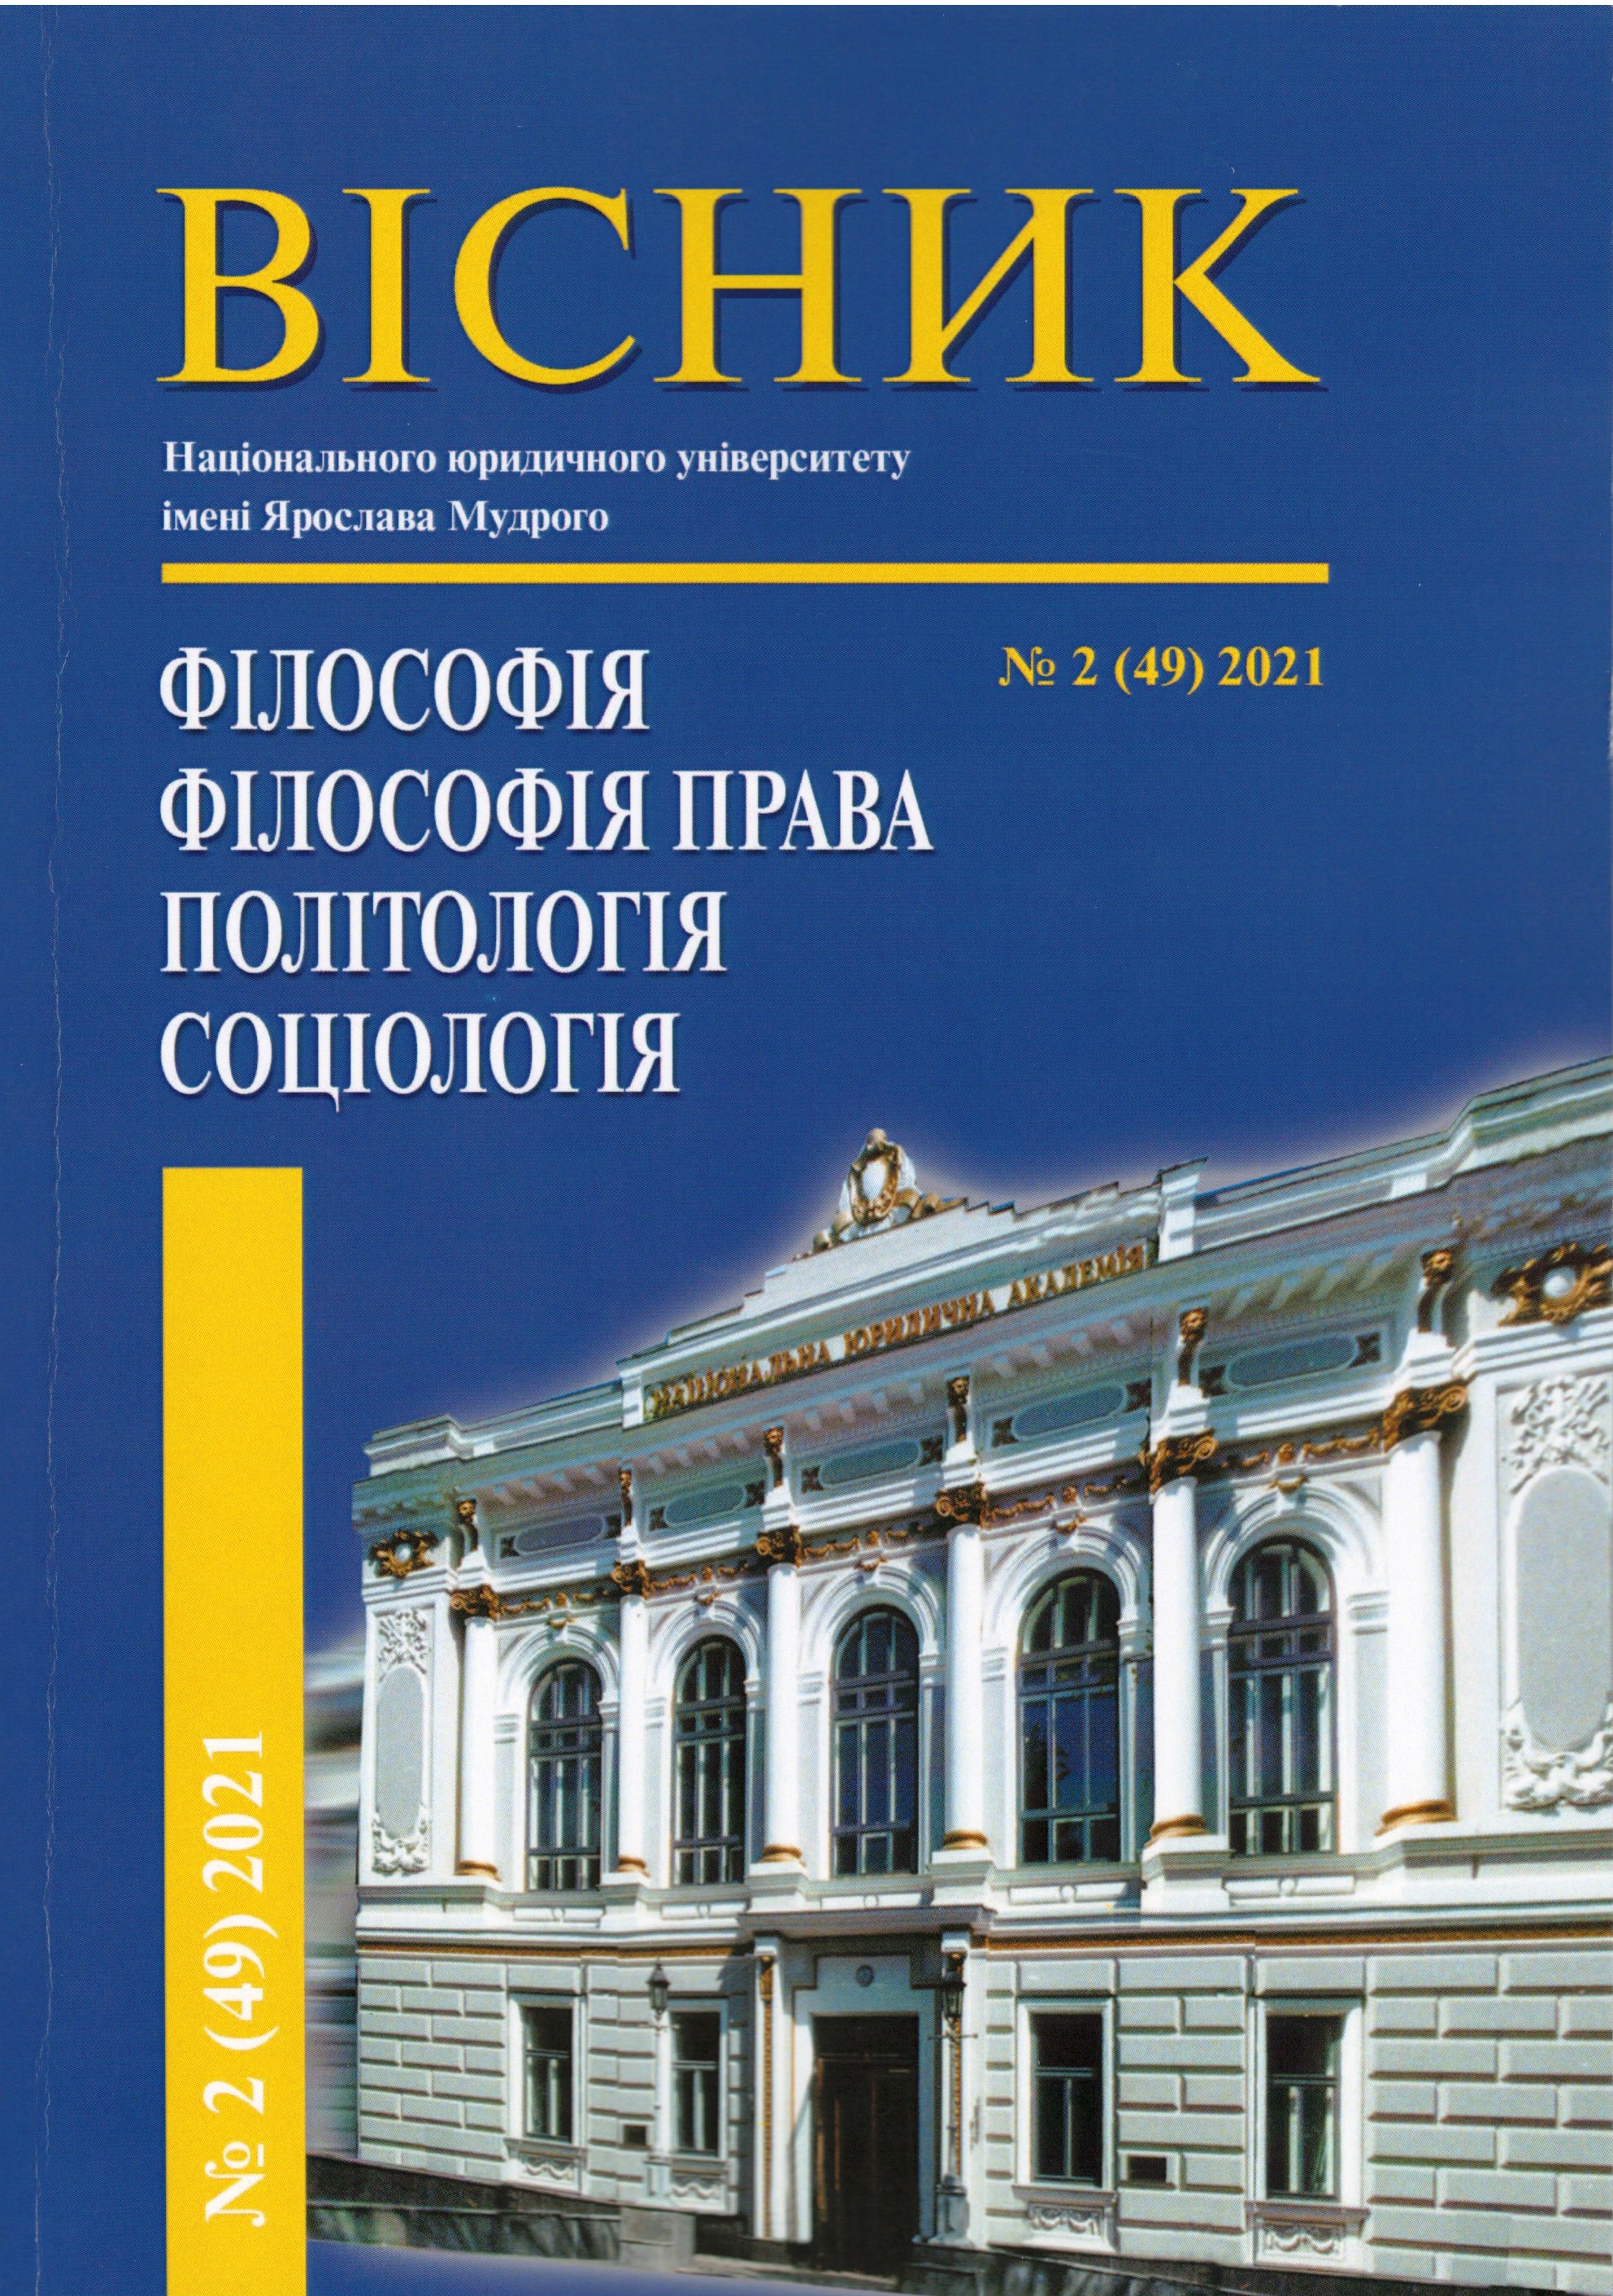 PROBLEMS OF PUBLIC GOVERNANCE IN UKRAINE: PUBLIC RESONANCE IN RELATION TO THE EFFECTIVENESS OF REFORMS Cover Image